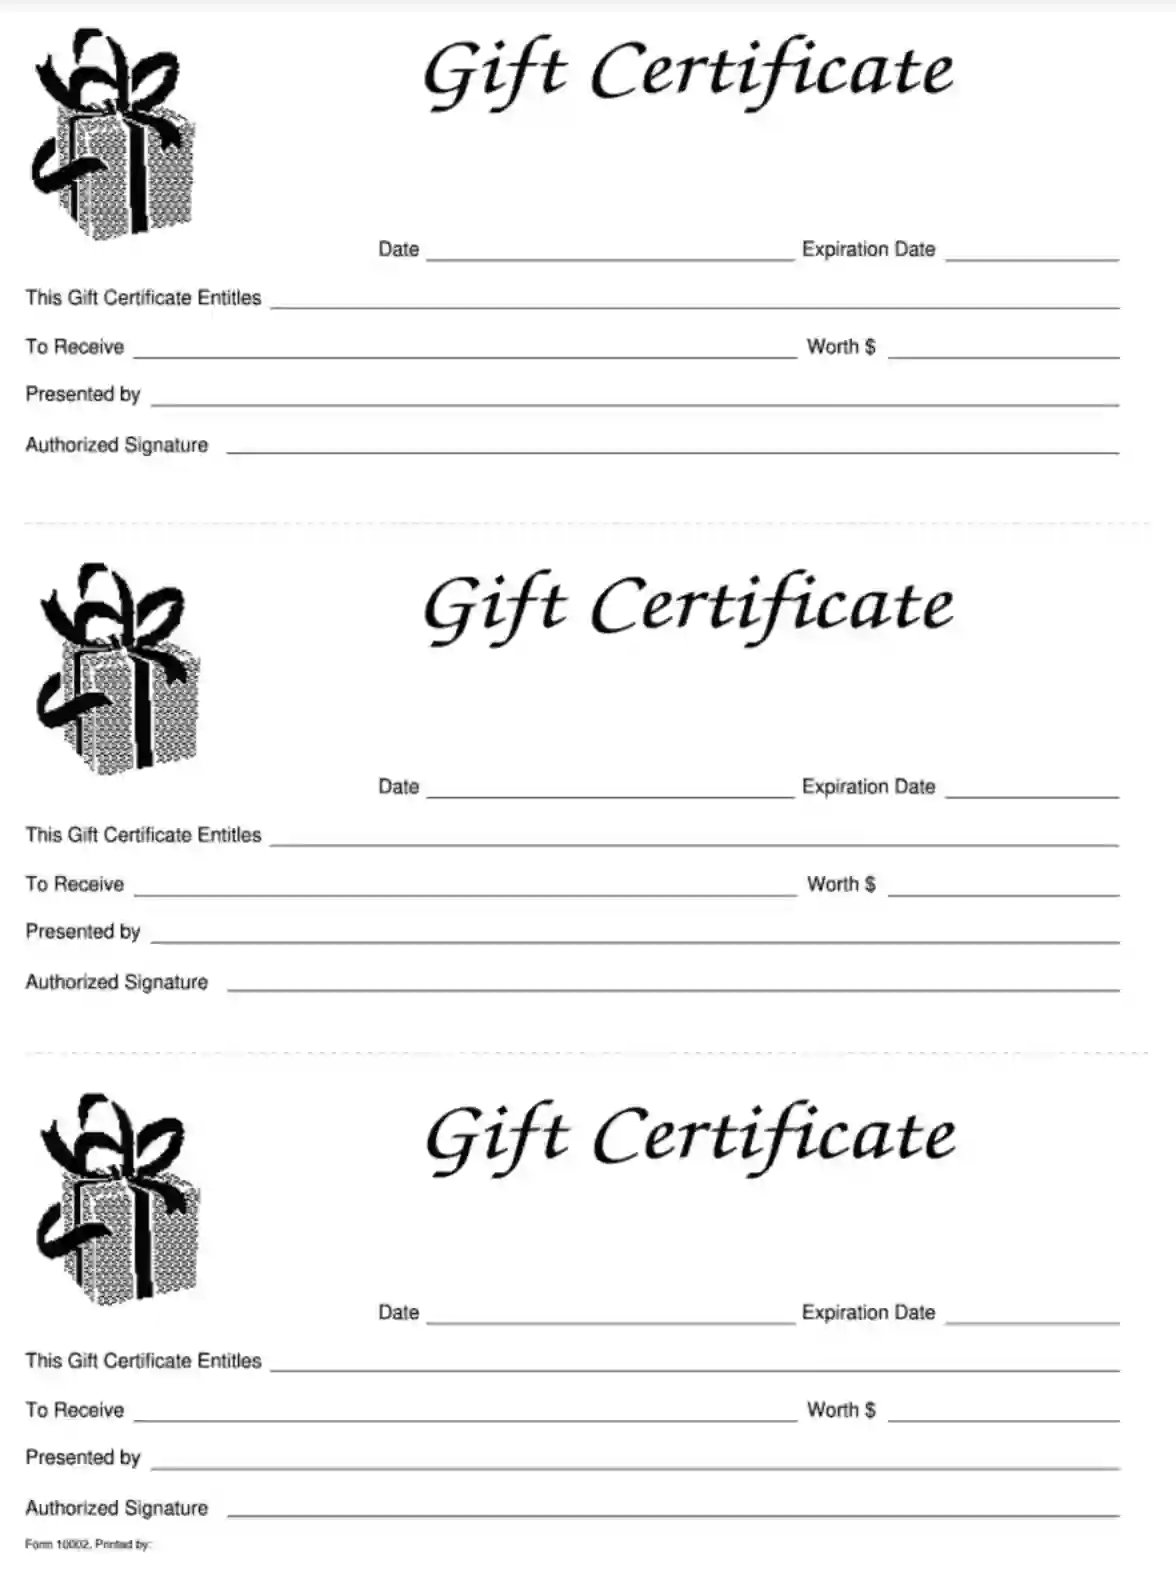 gift certificate template